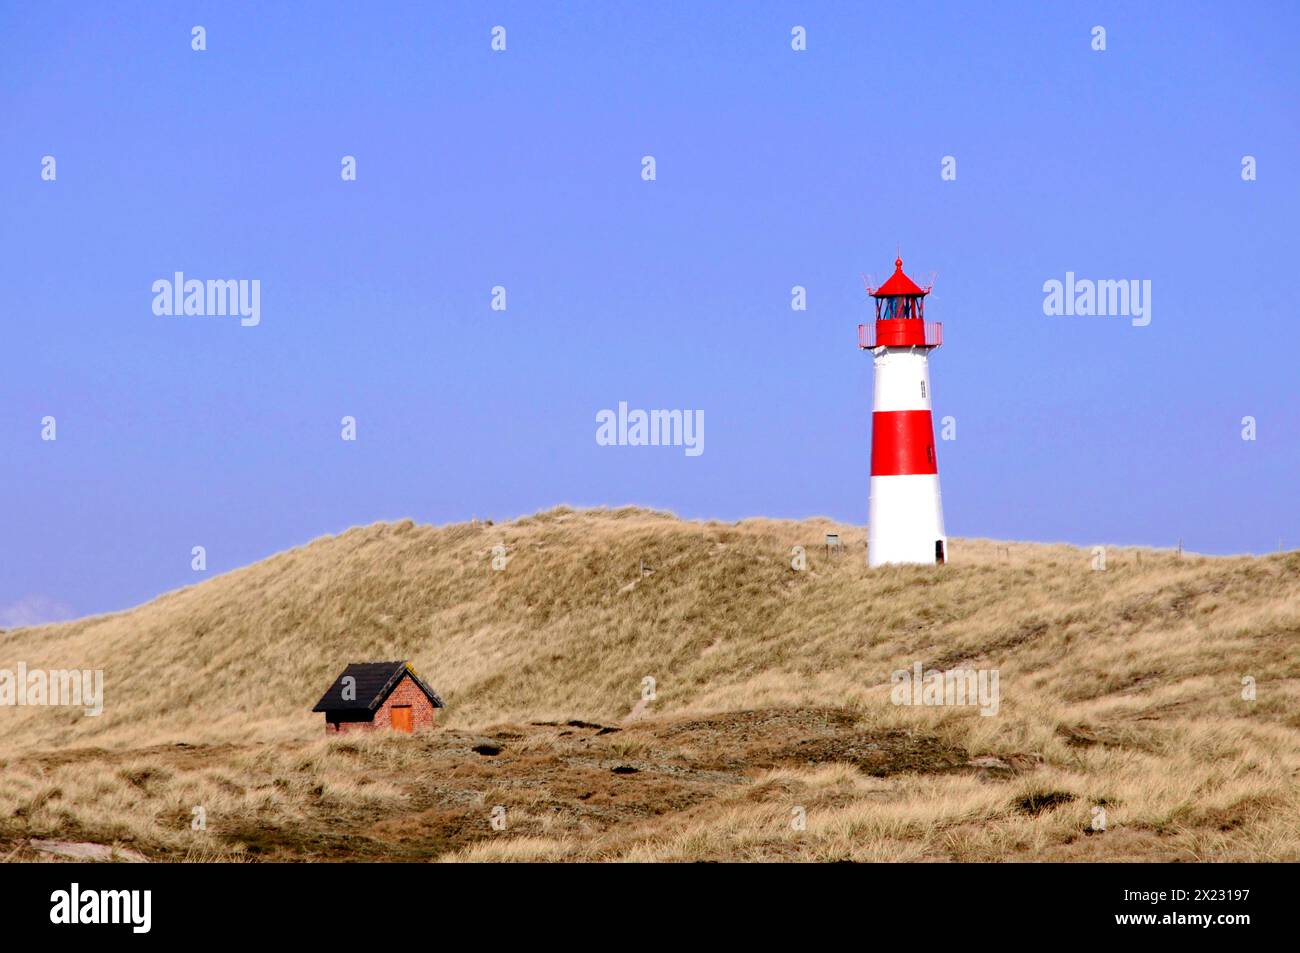 Sylt, Schleswig-Holstein, lighthouse at Ellenbogen, North Frisian island, Germany, Europe, red and white lighthouse stands in a dune landscape under Stock Photo